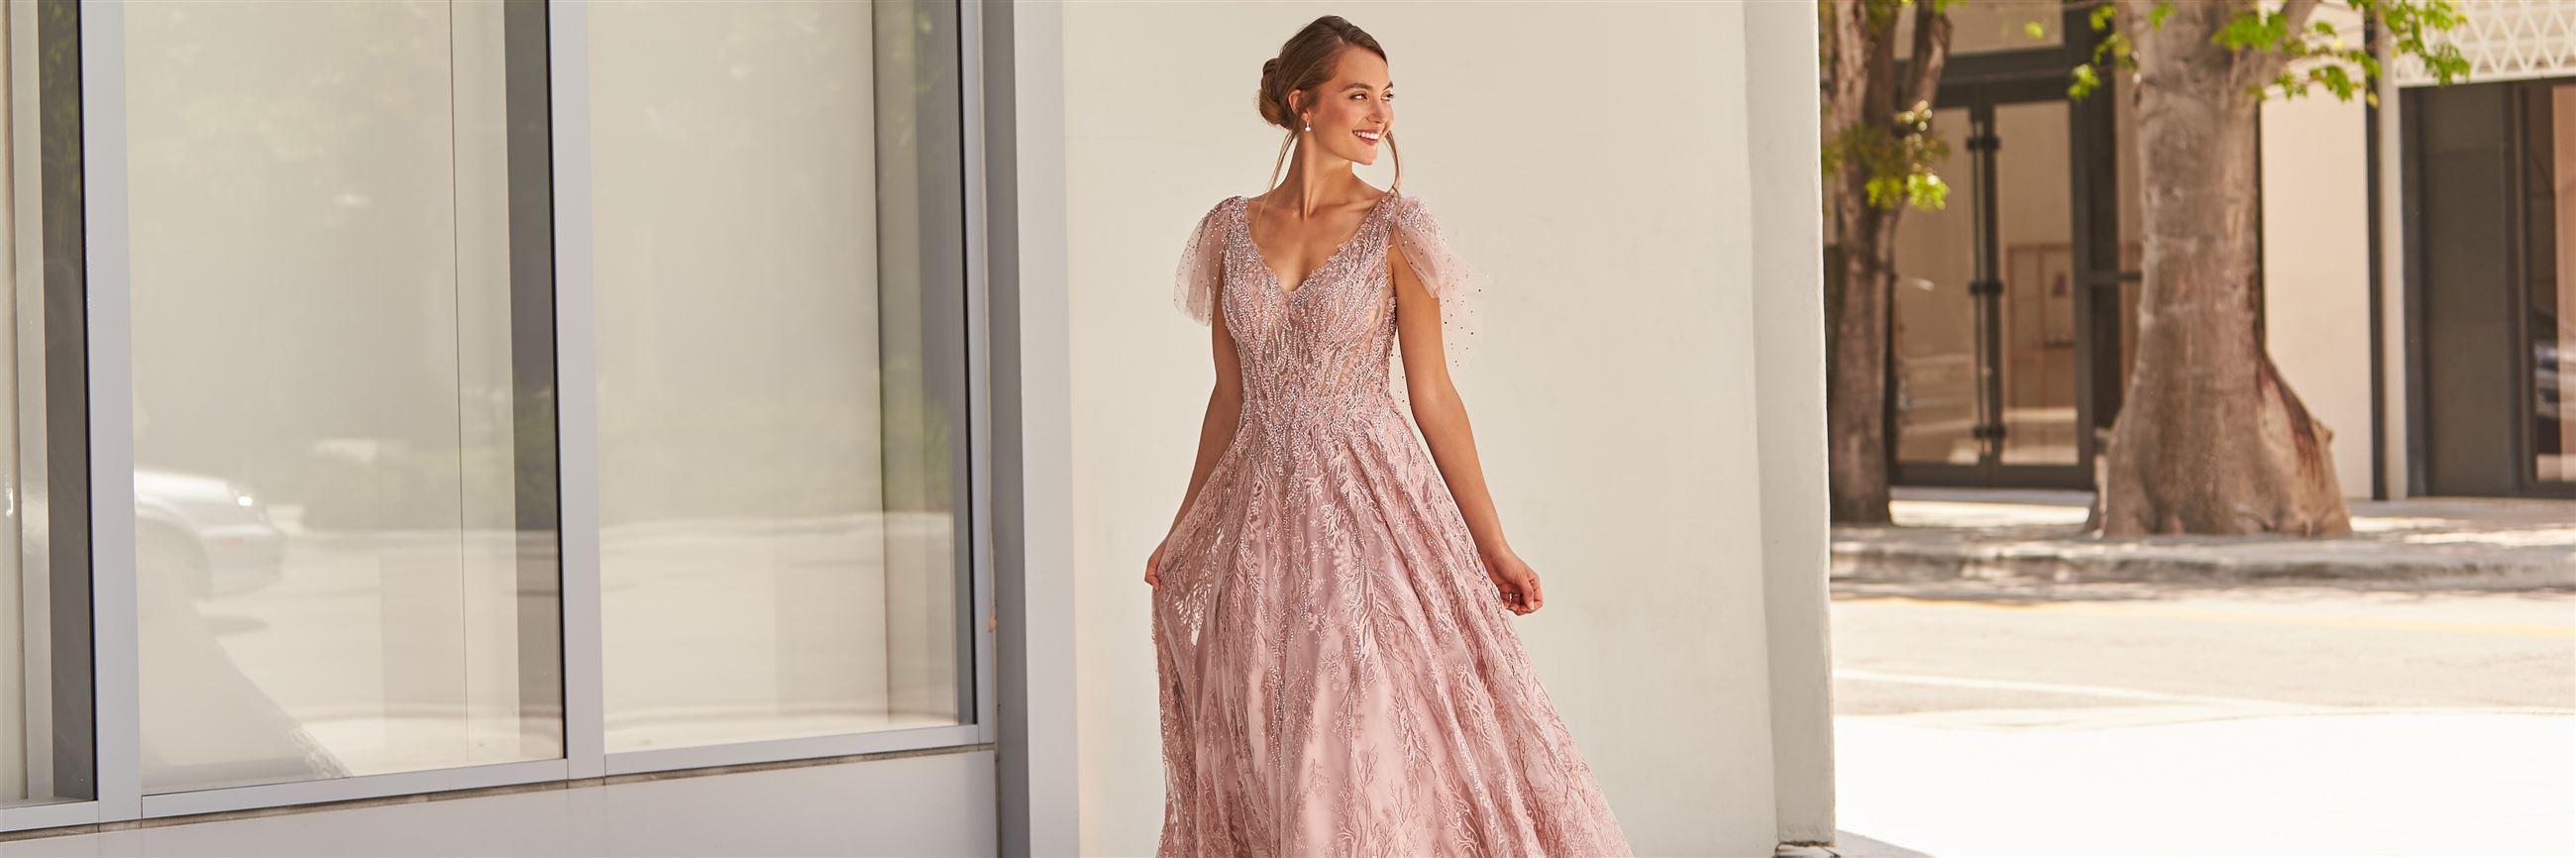 Model wearing pale pink mother of the bride dress